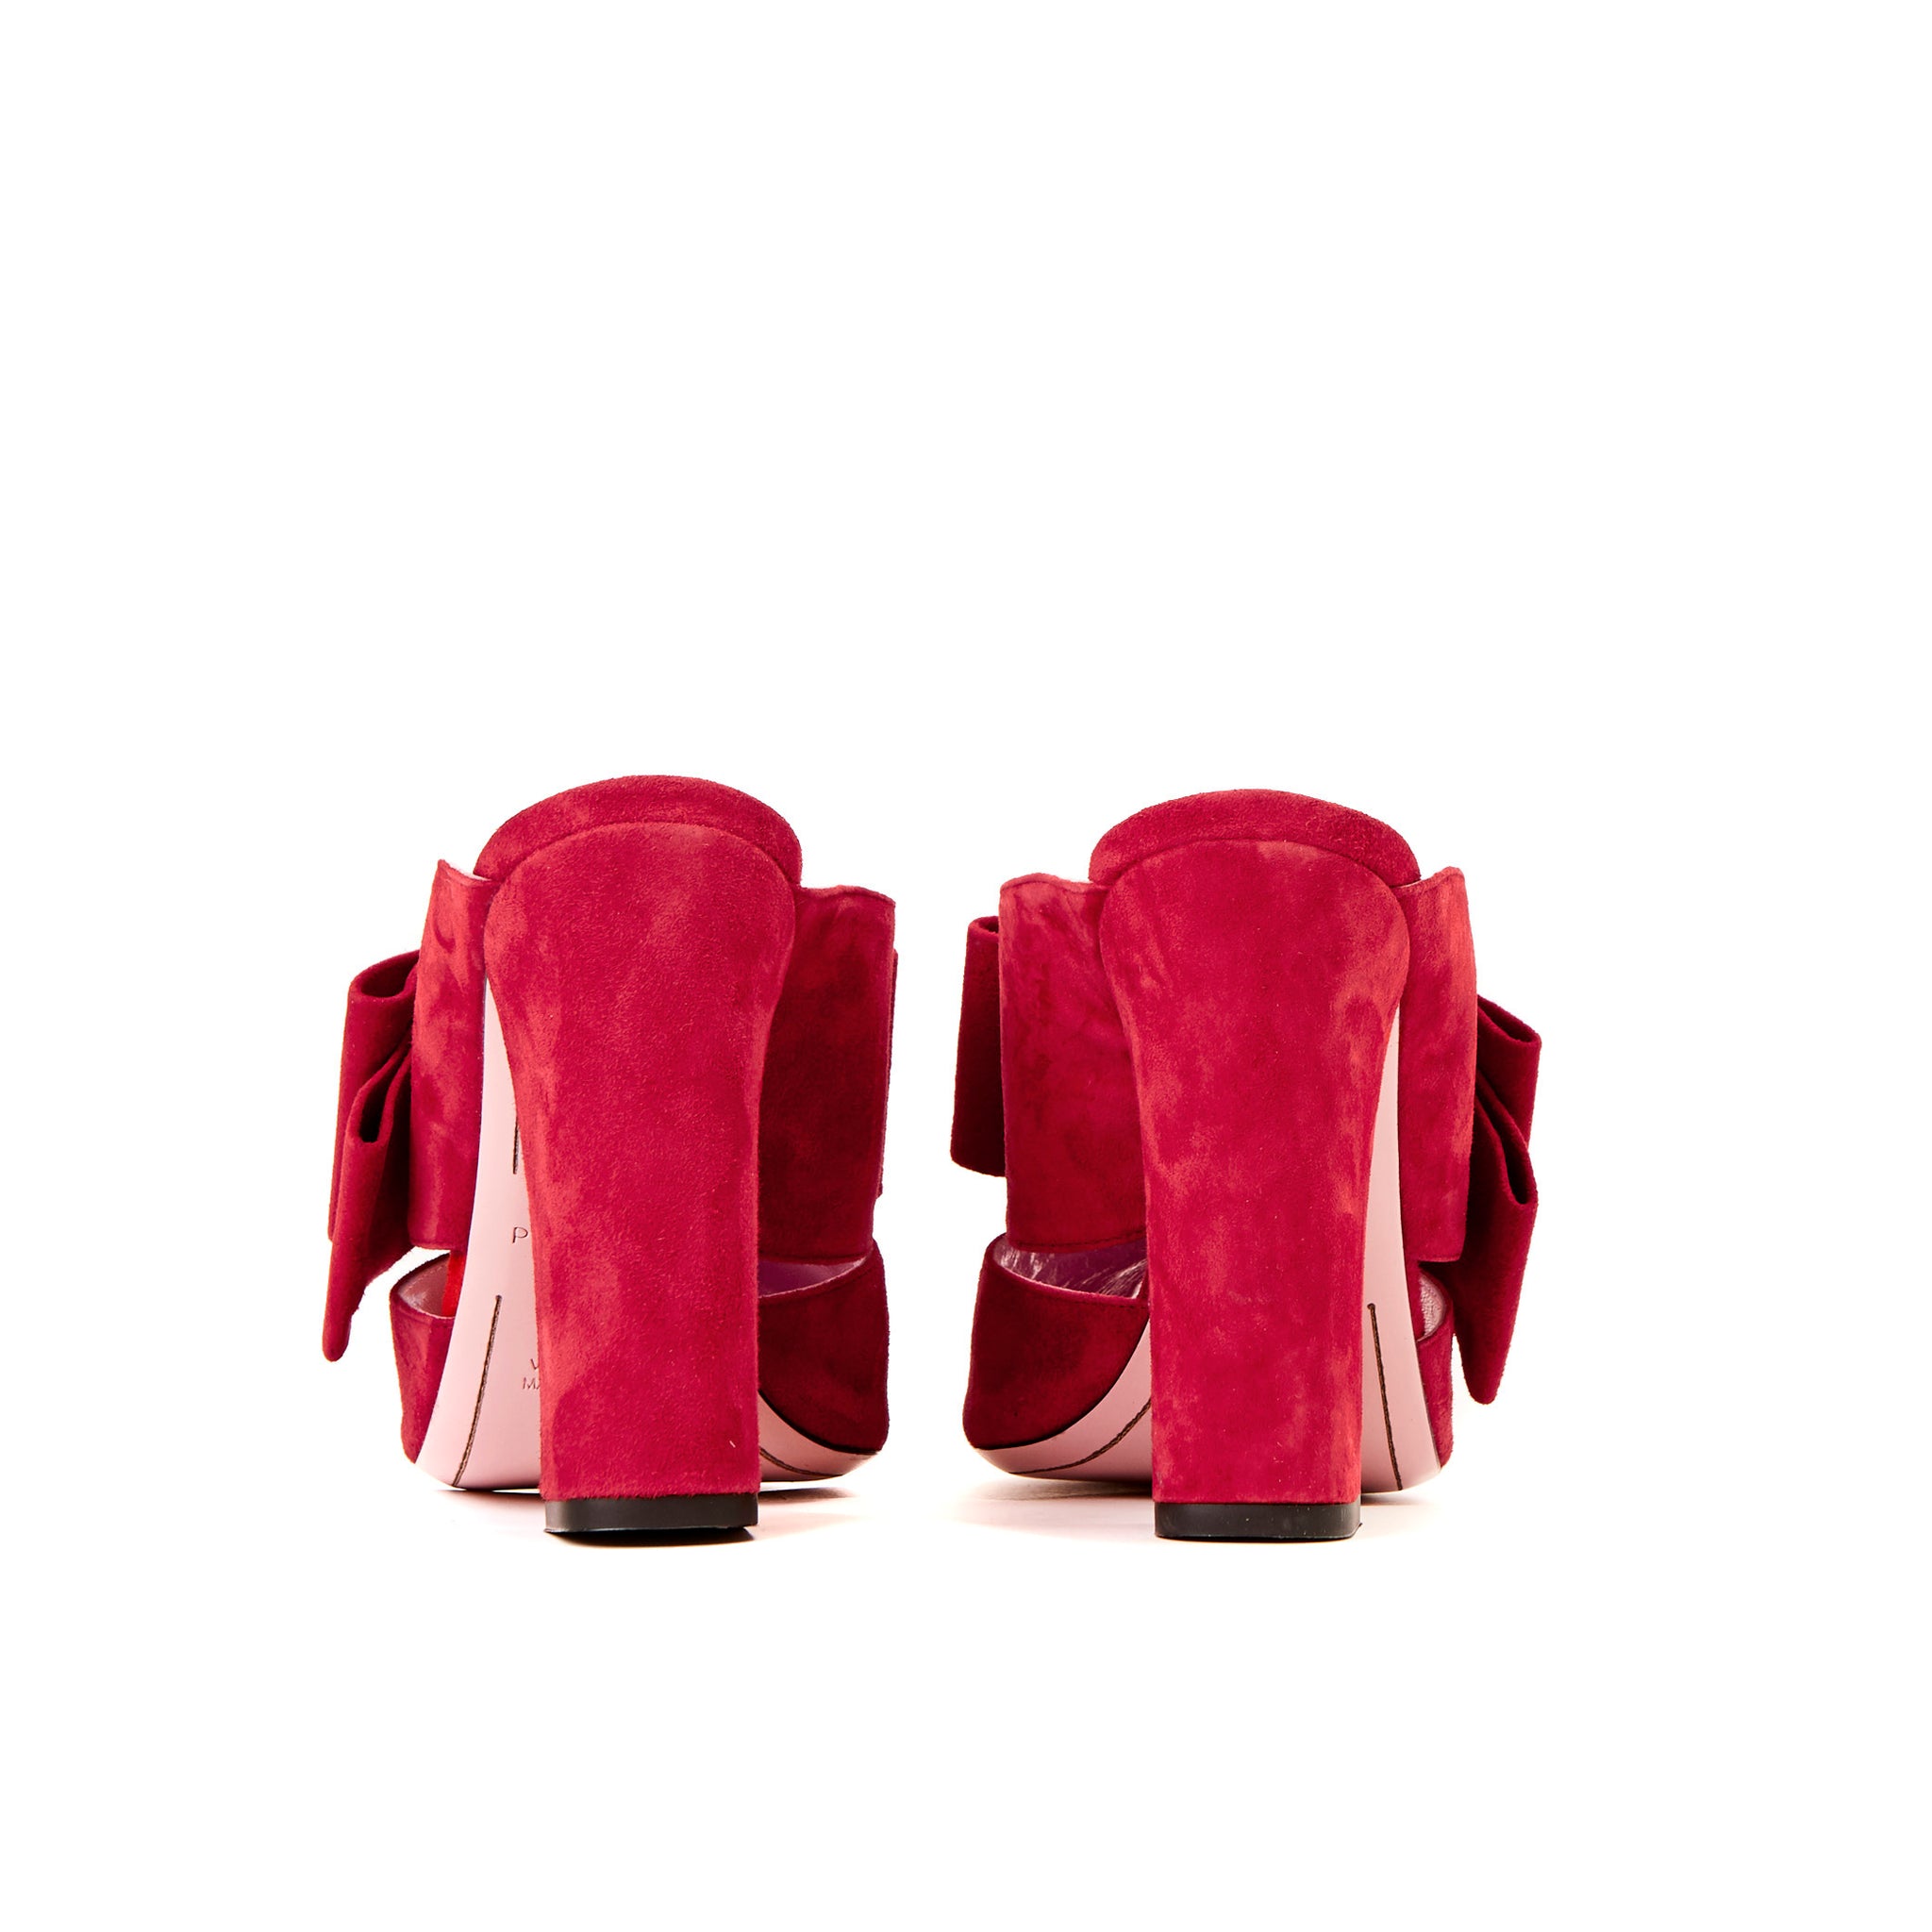 Phare High heel block heel mule with bow in rosso suede sole view 